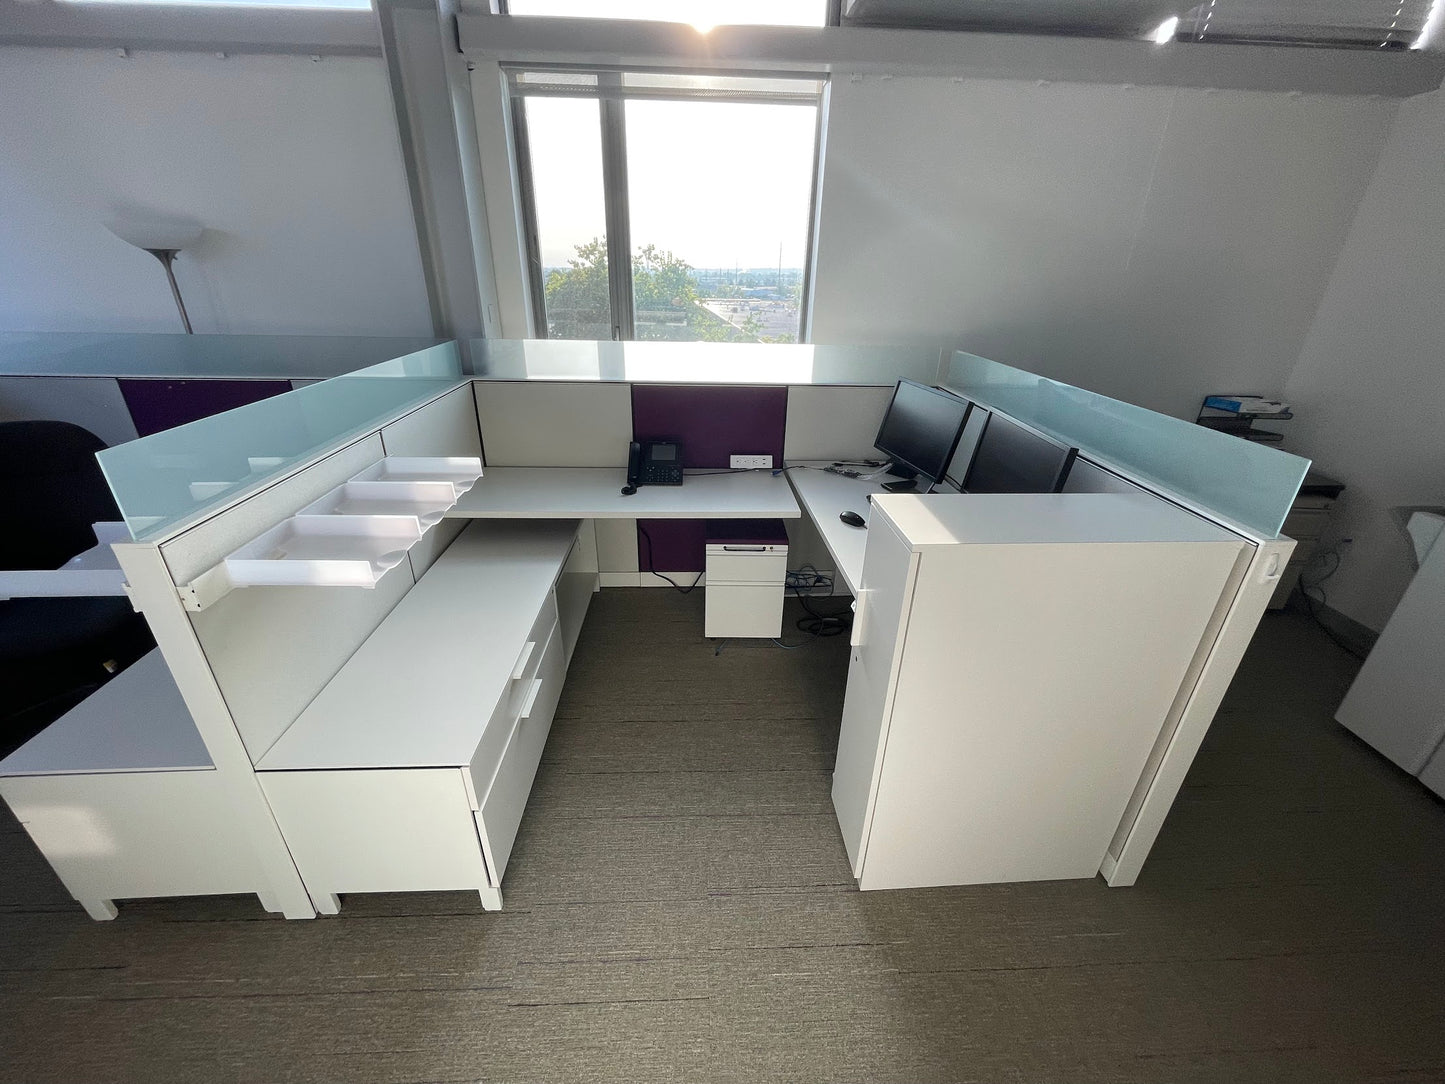 Load image into Gallery viewer, Picture of Herman miller canvas cubicle system with white and purple panels
